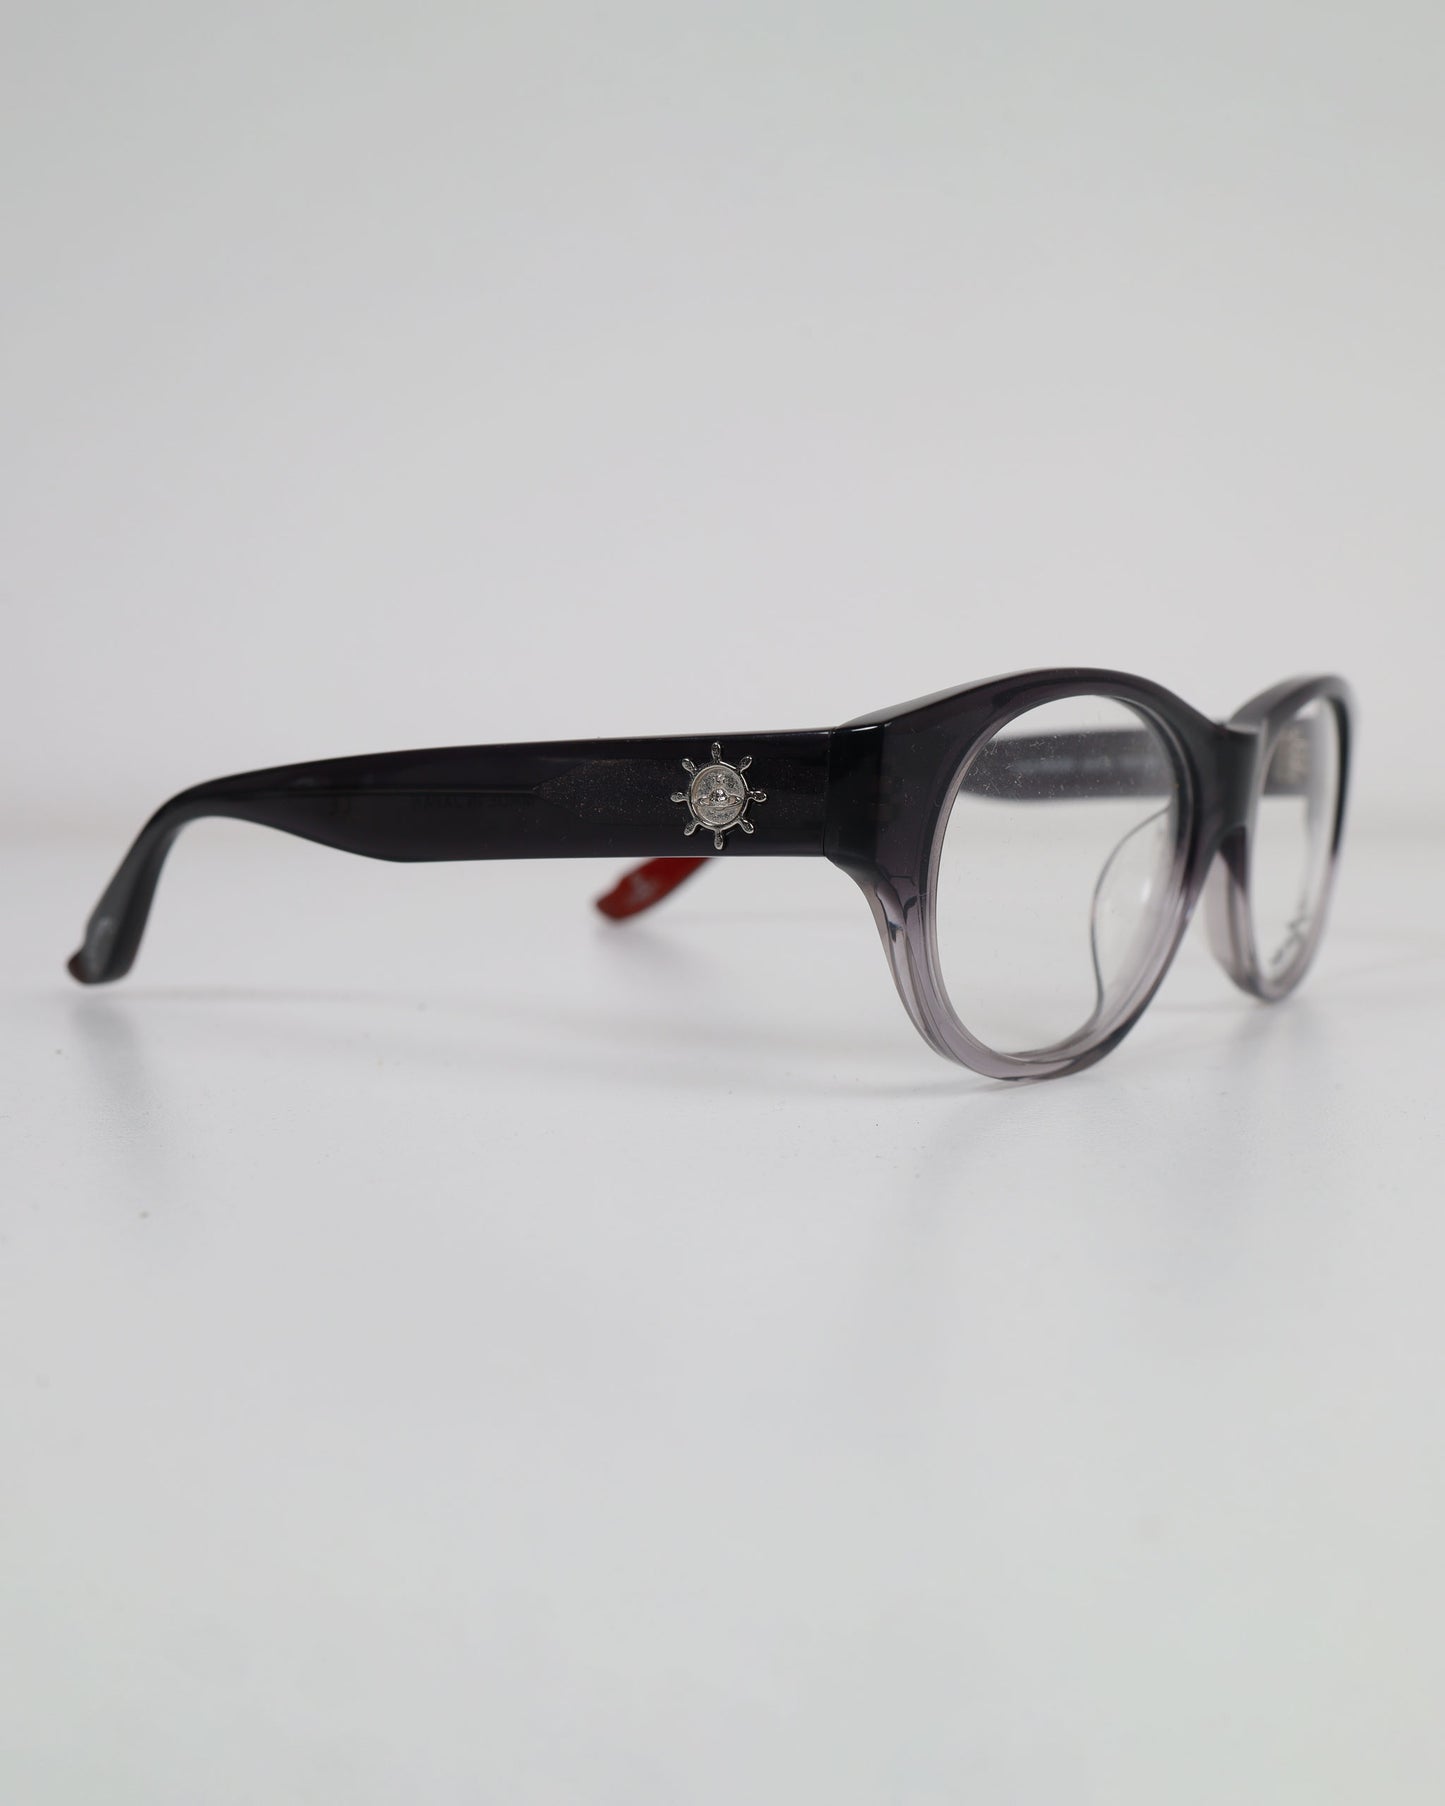 Vivienne Westwood Anglomania Three-Dimensional Pattern Glasses Black/Red